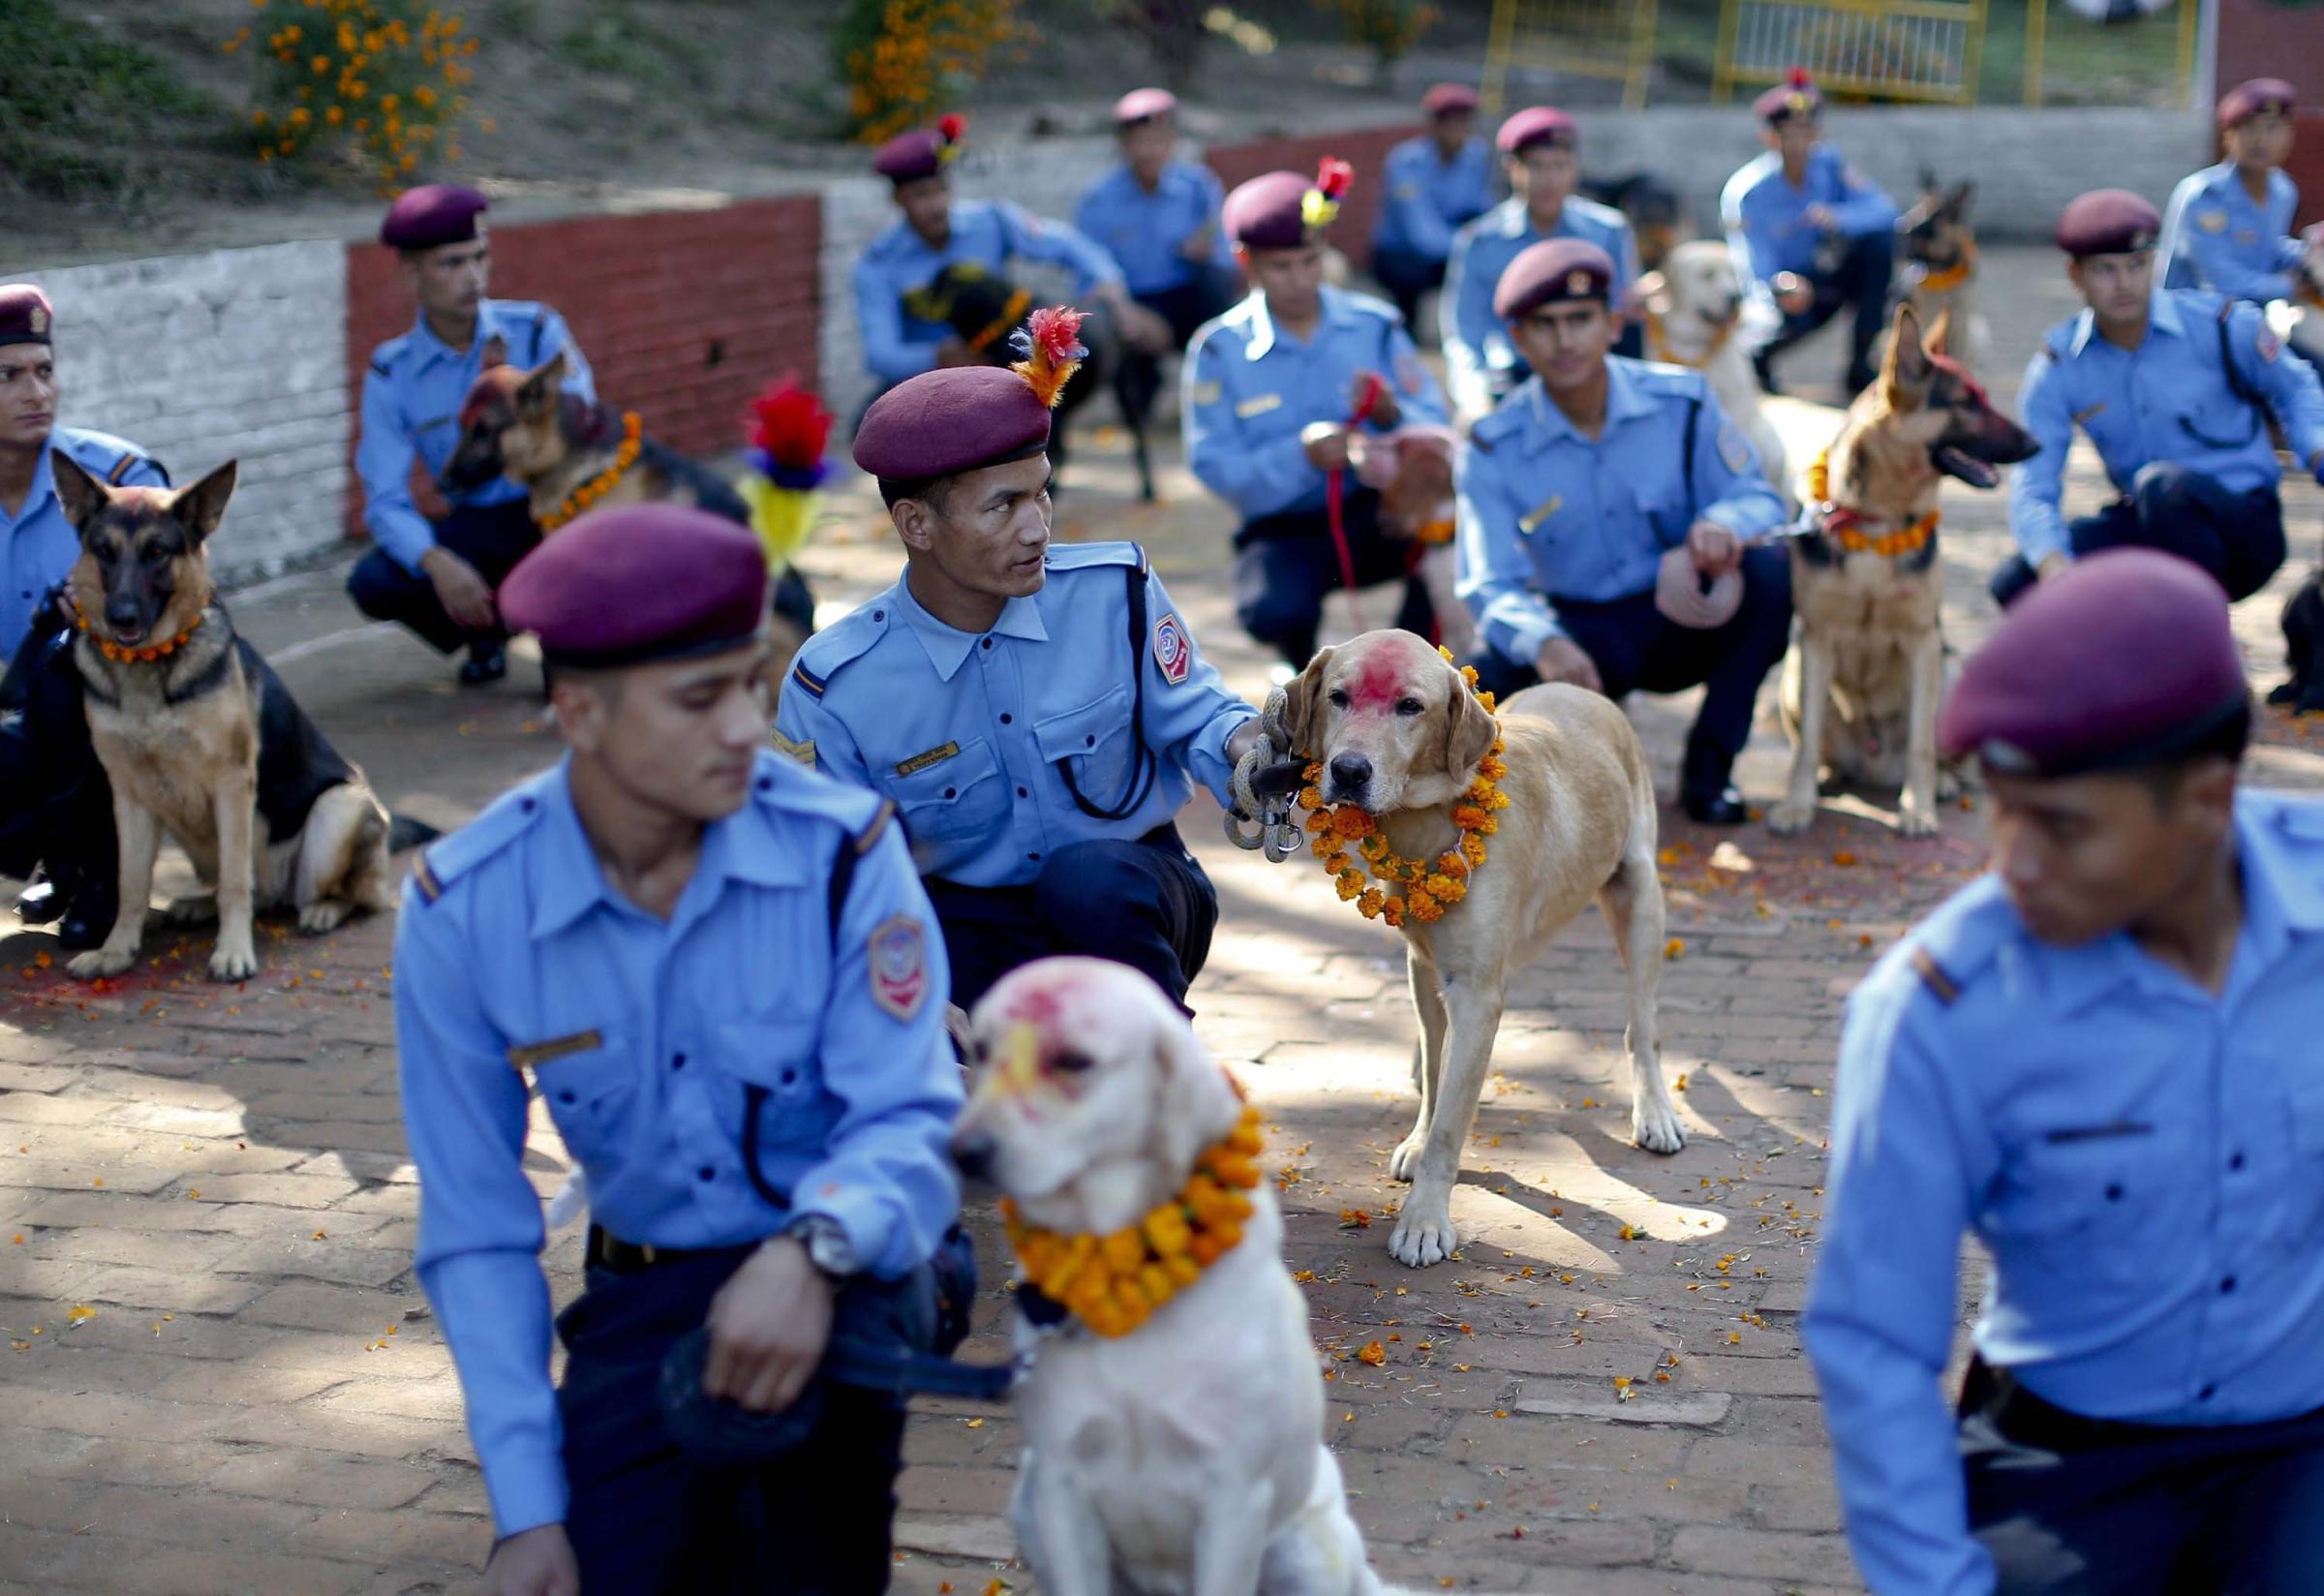 Nepalese police officers kneel next to dogs with colored powder on their heads at Nepal's Central Police Dog Training School as part of the Diwali festival, also known as Tihar Festival, in Kathmandu, Nepal on Oct. 22, 2014.